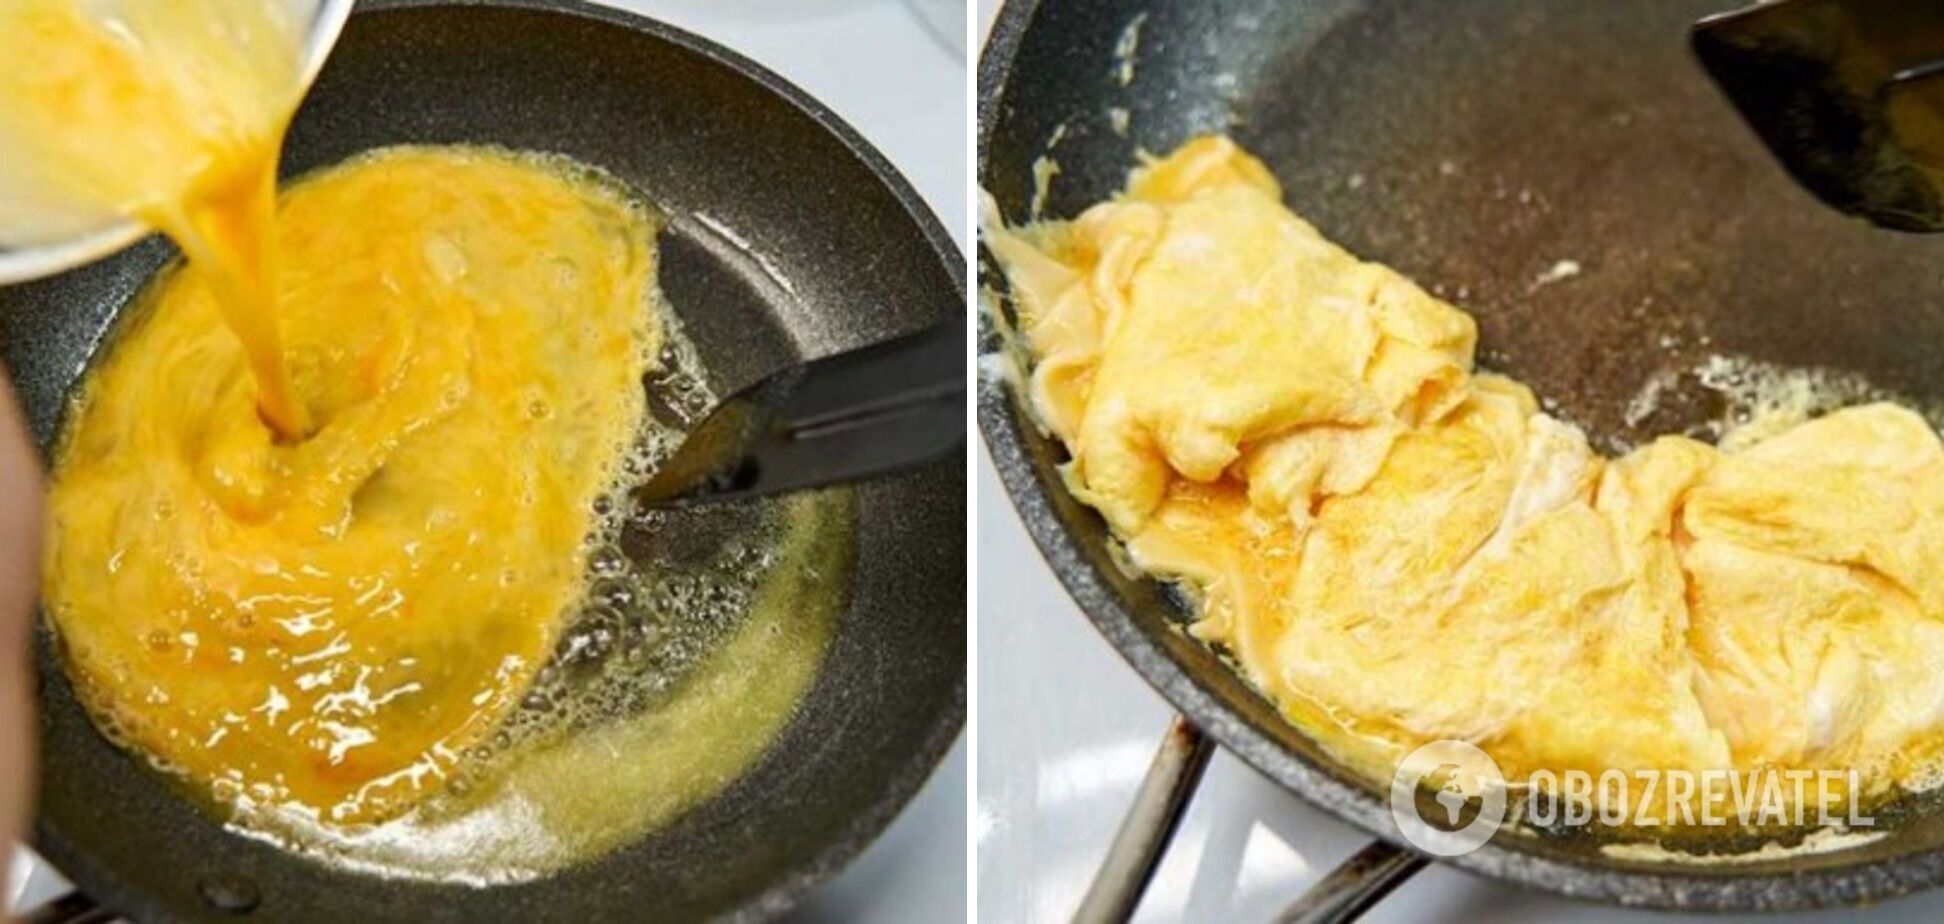 What to use for frying eggs